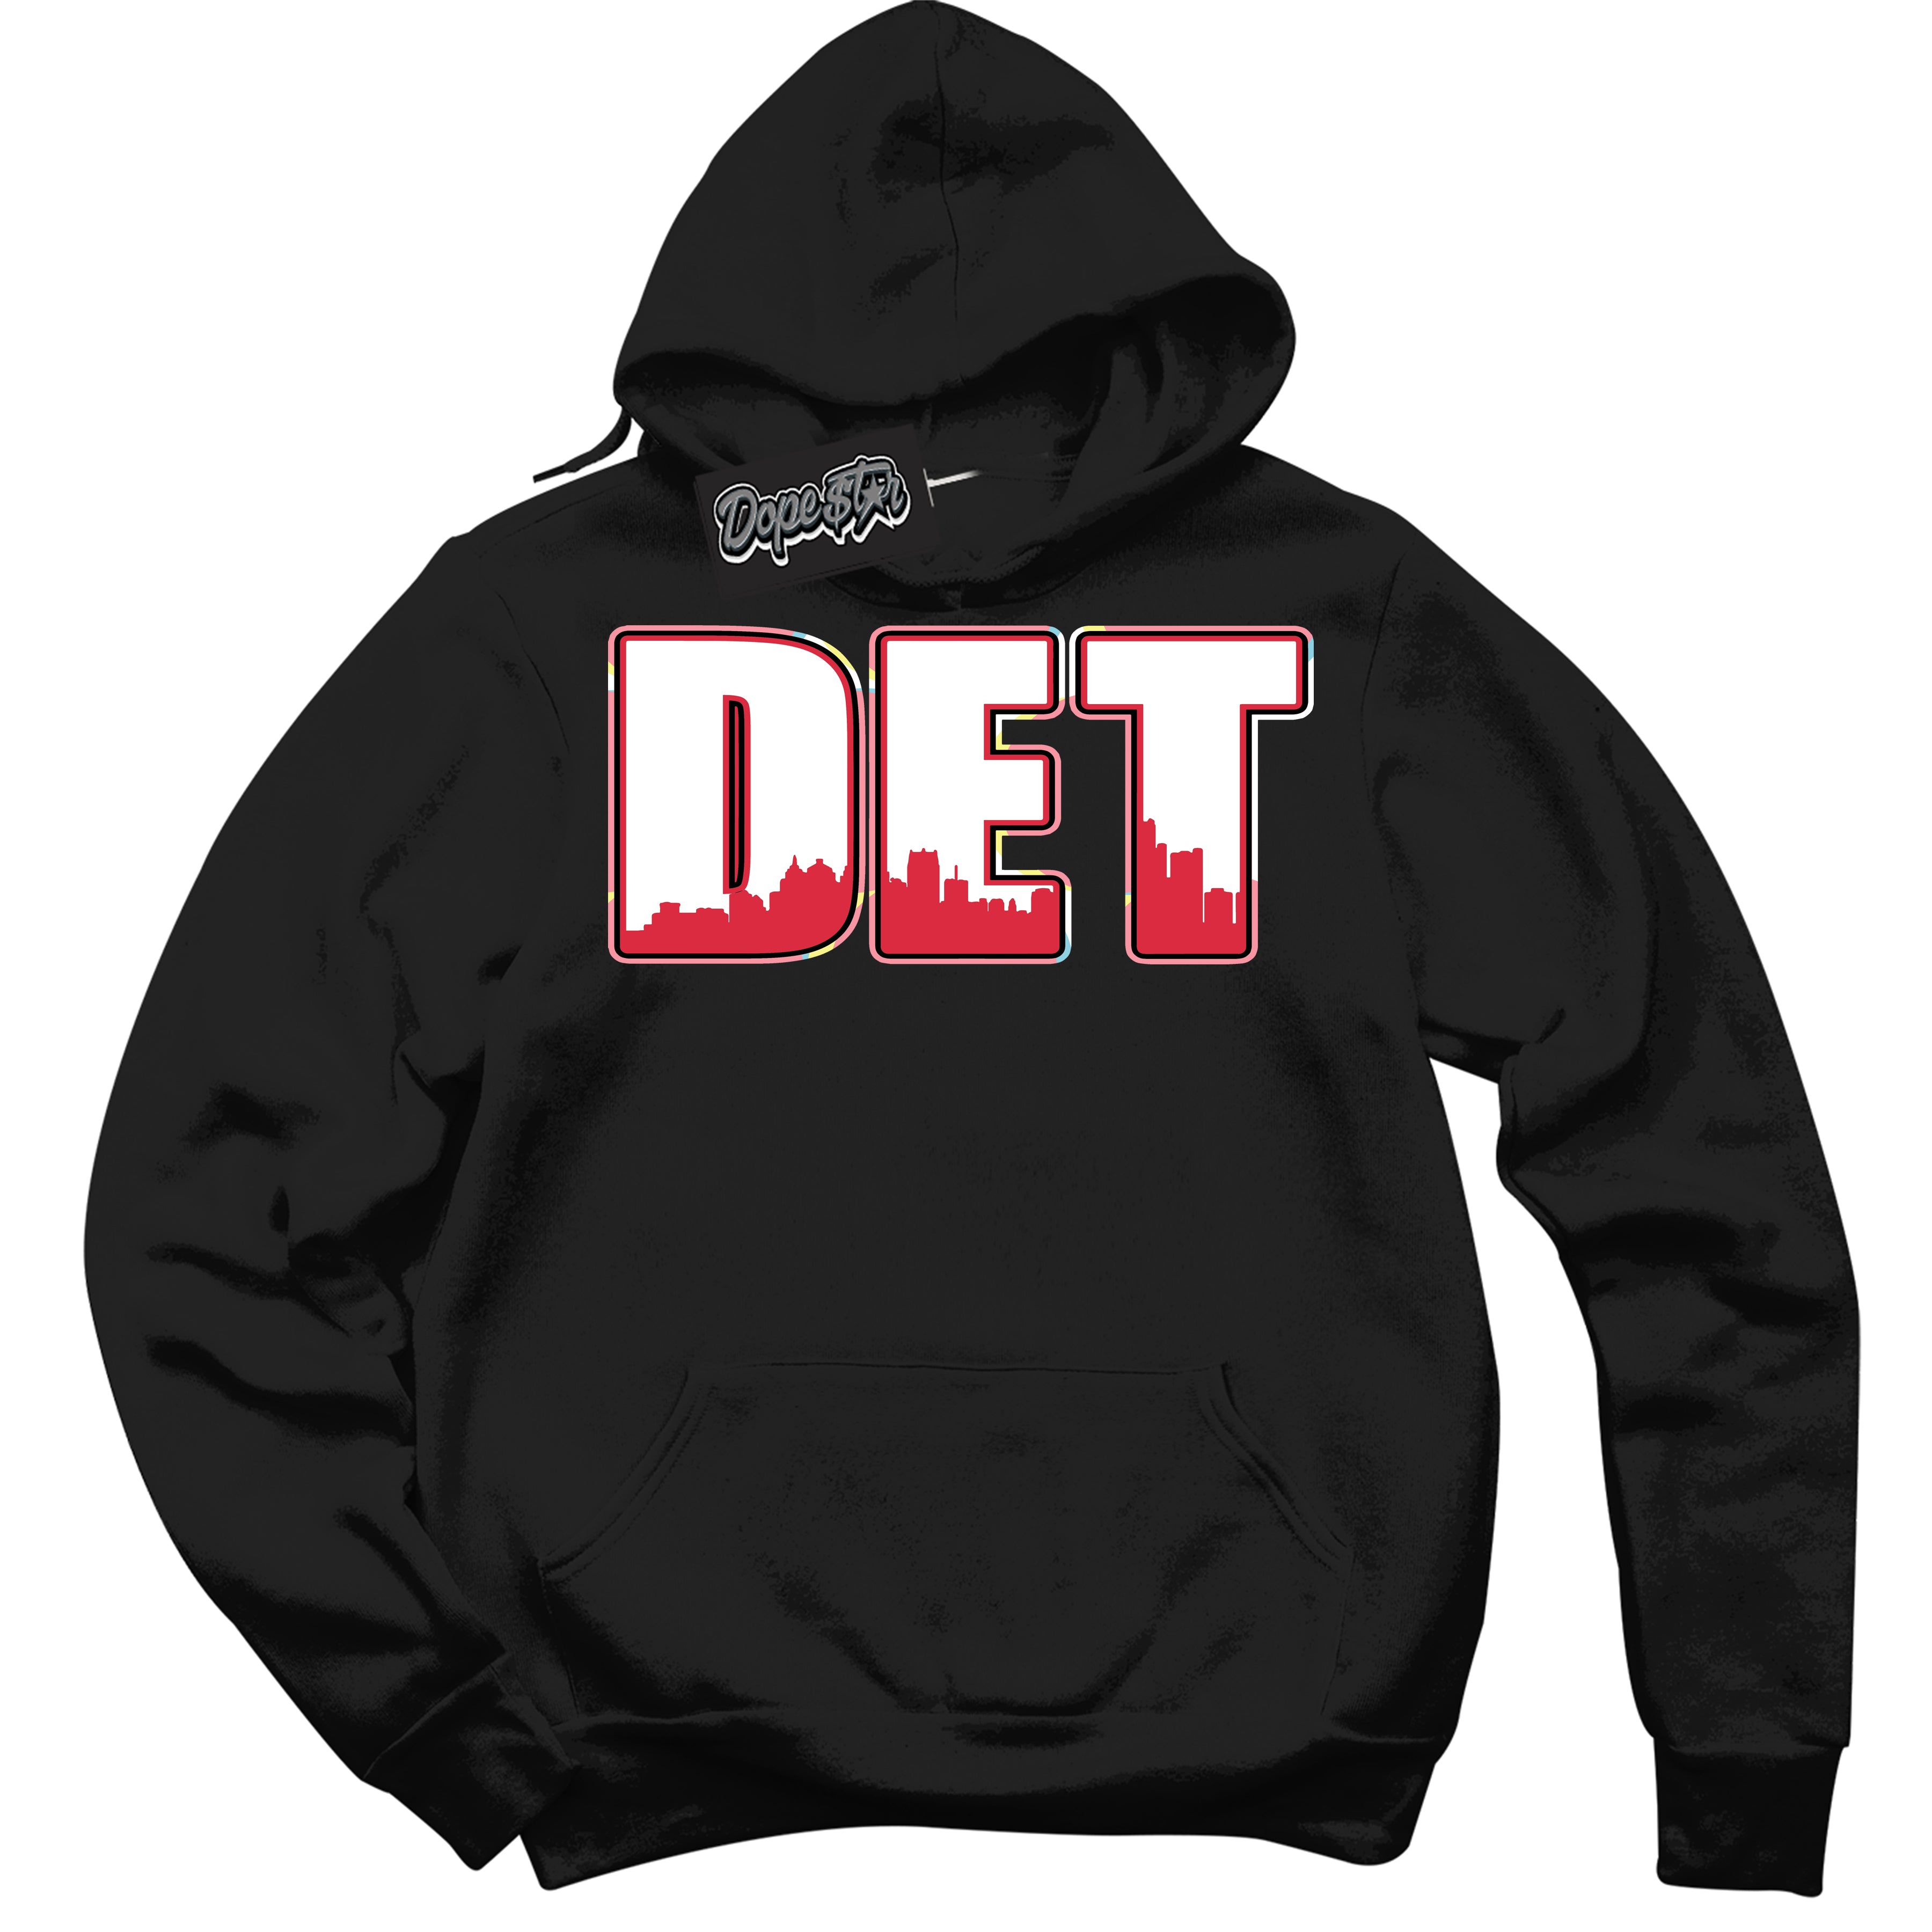 Cool Black Graphic DopeStar Hoodie with “ Detroit “ print, that perfectly matches Spider-Verse 1s sneakers